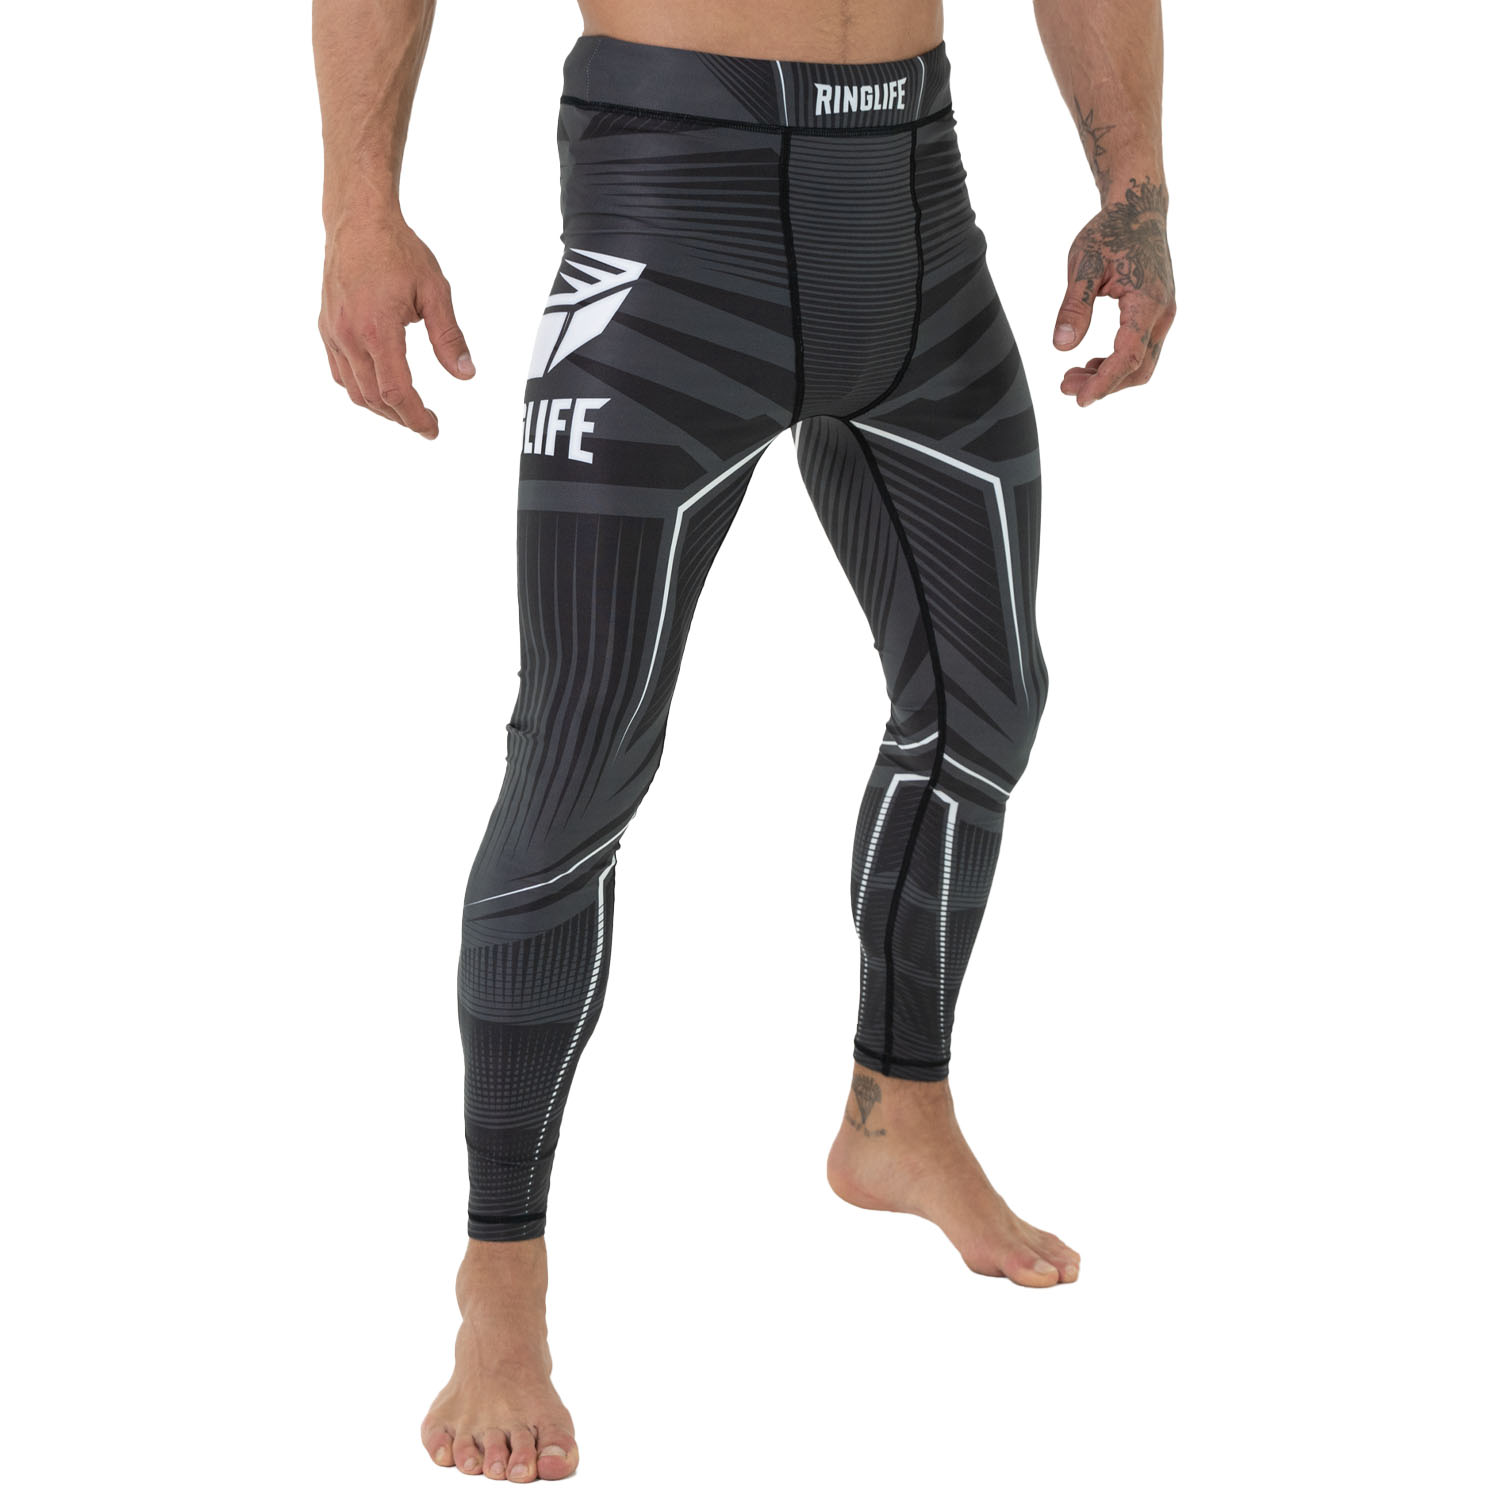 RINGLIFE Compression Pants - Octaring schwarz-weiss M